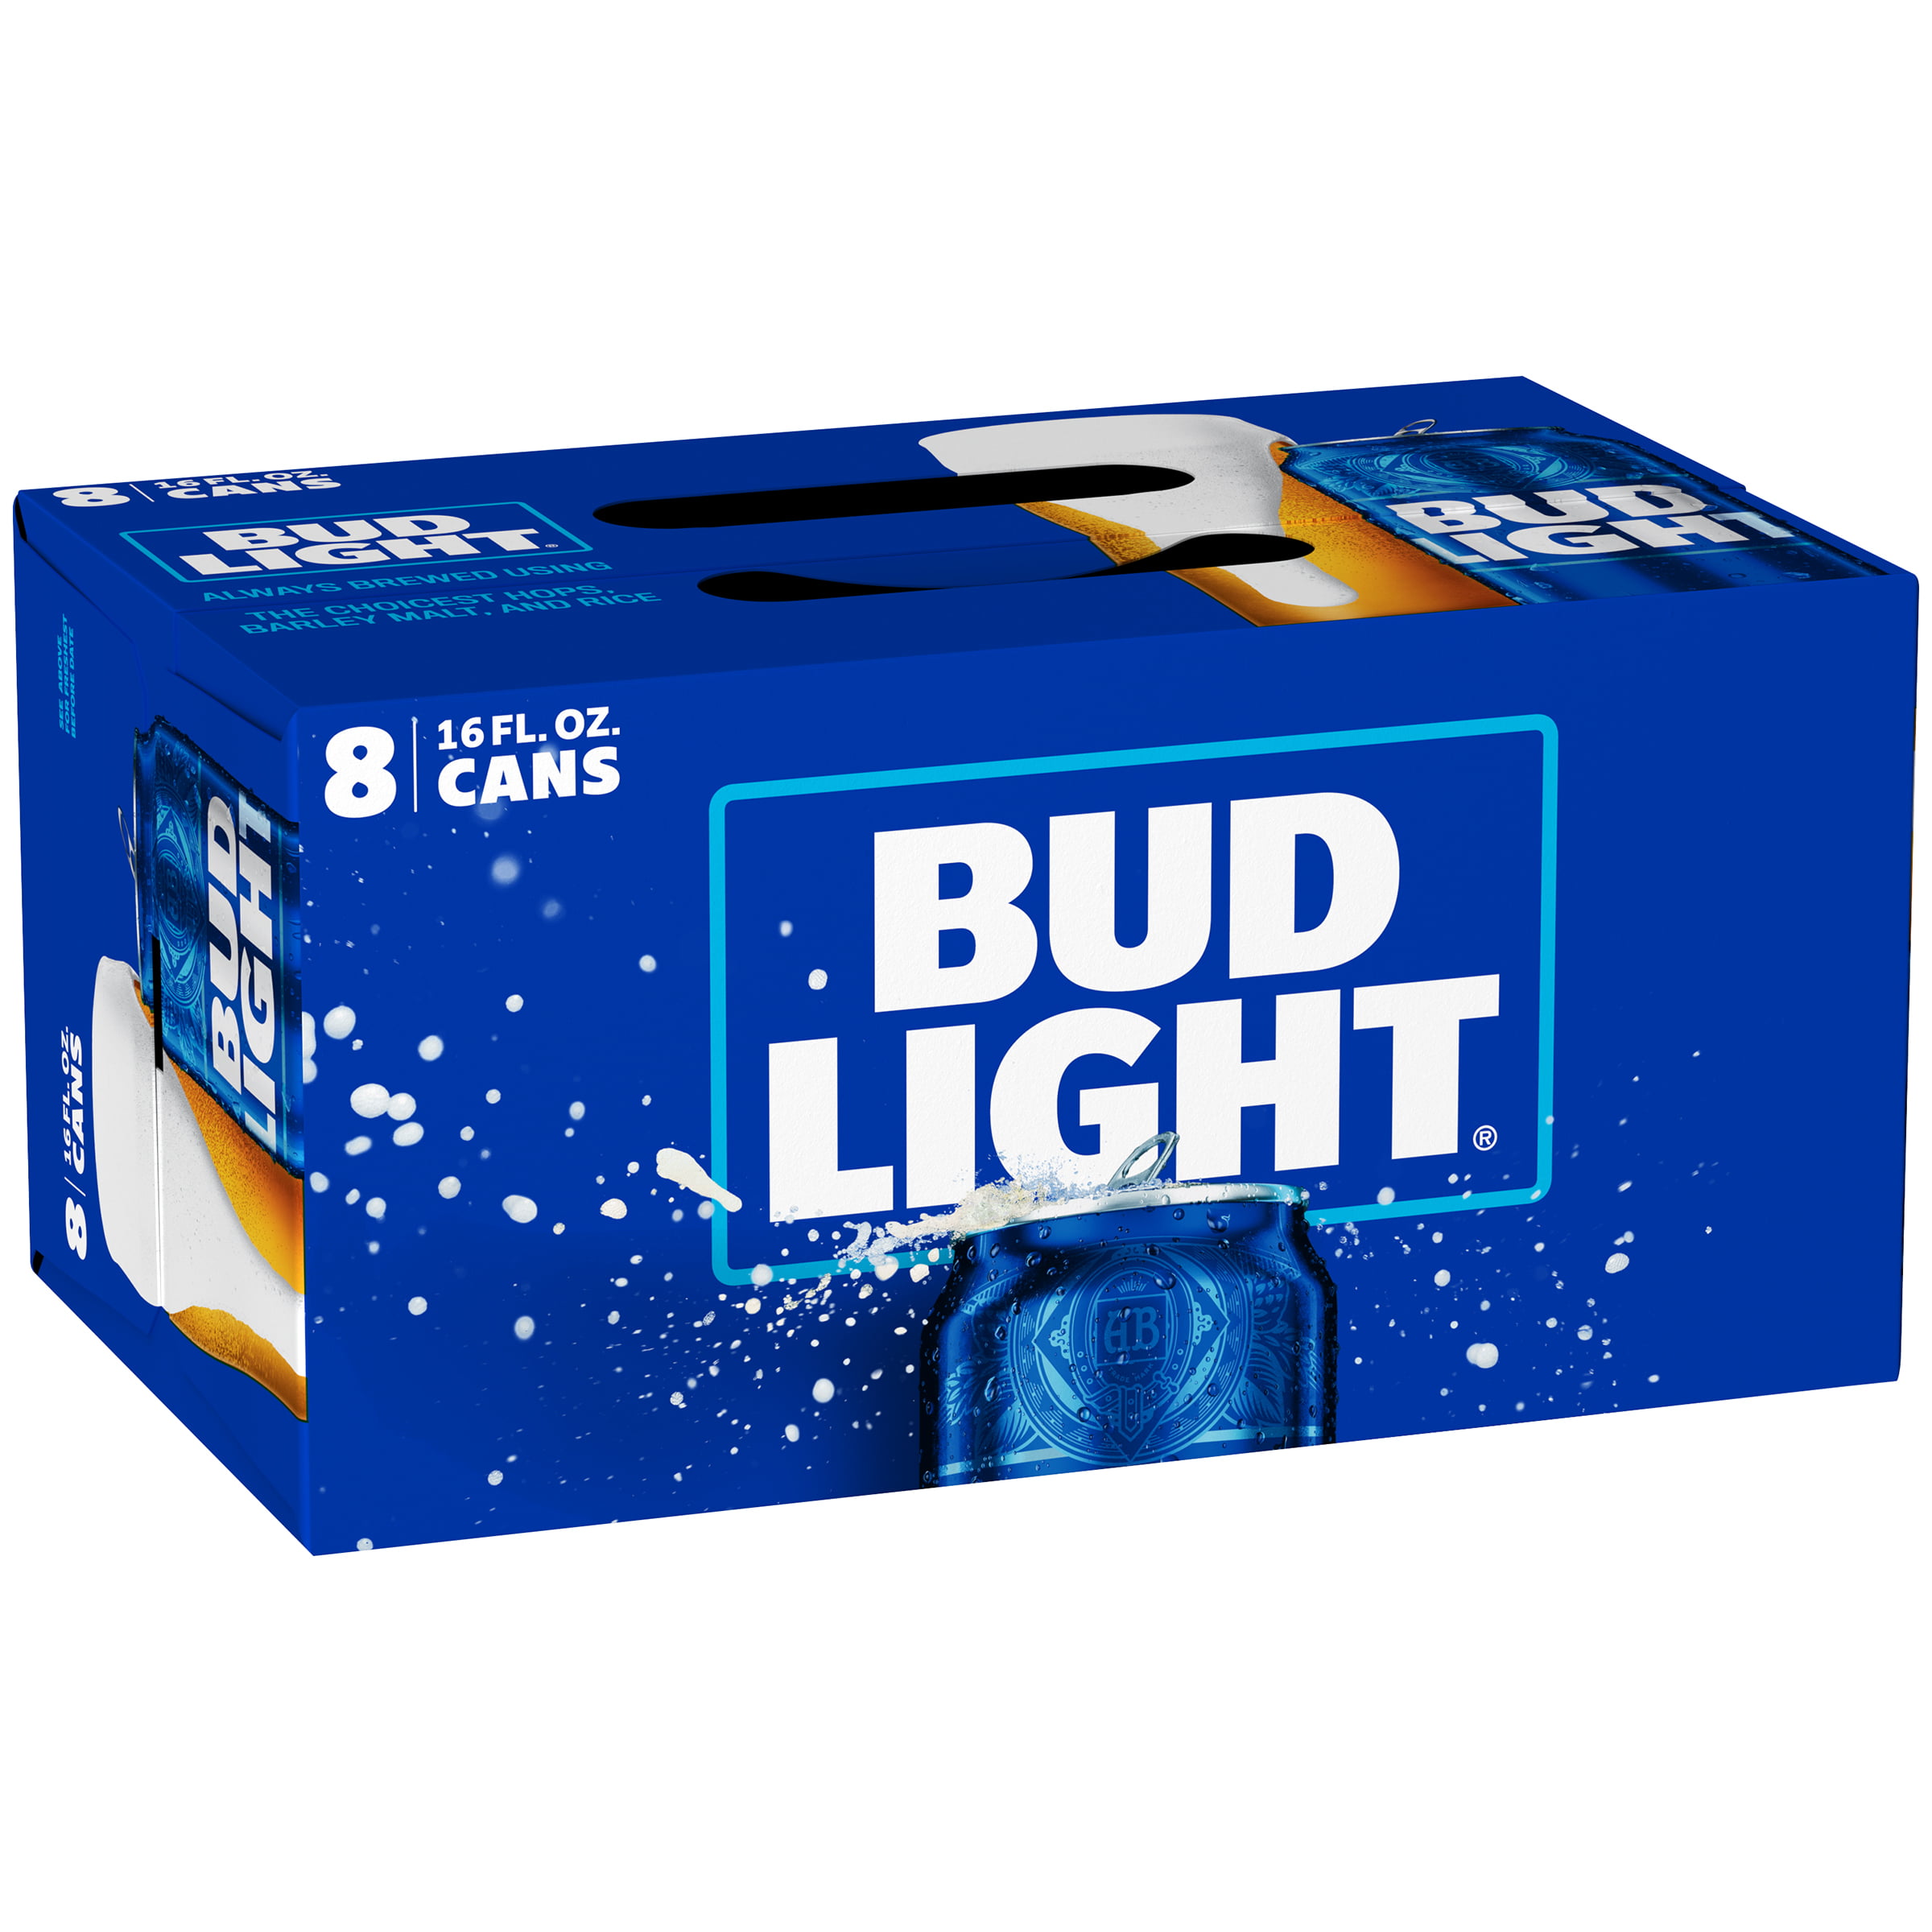 bud-light-beer-8-pack-beer-16-fl-oz-cans-4-2-abv-free-nude-porn-photos